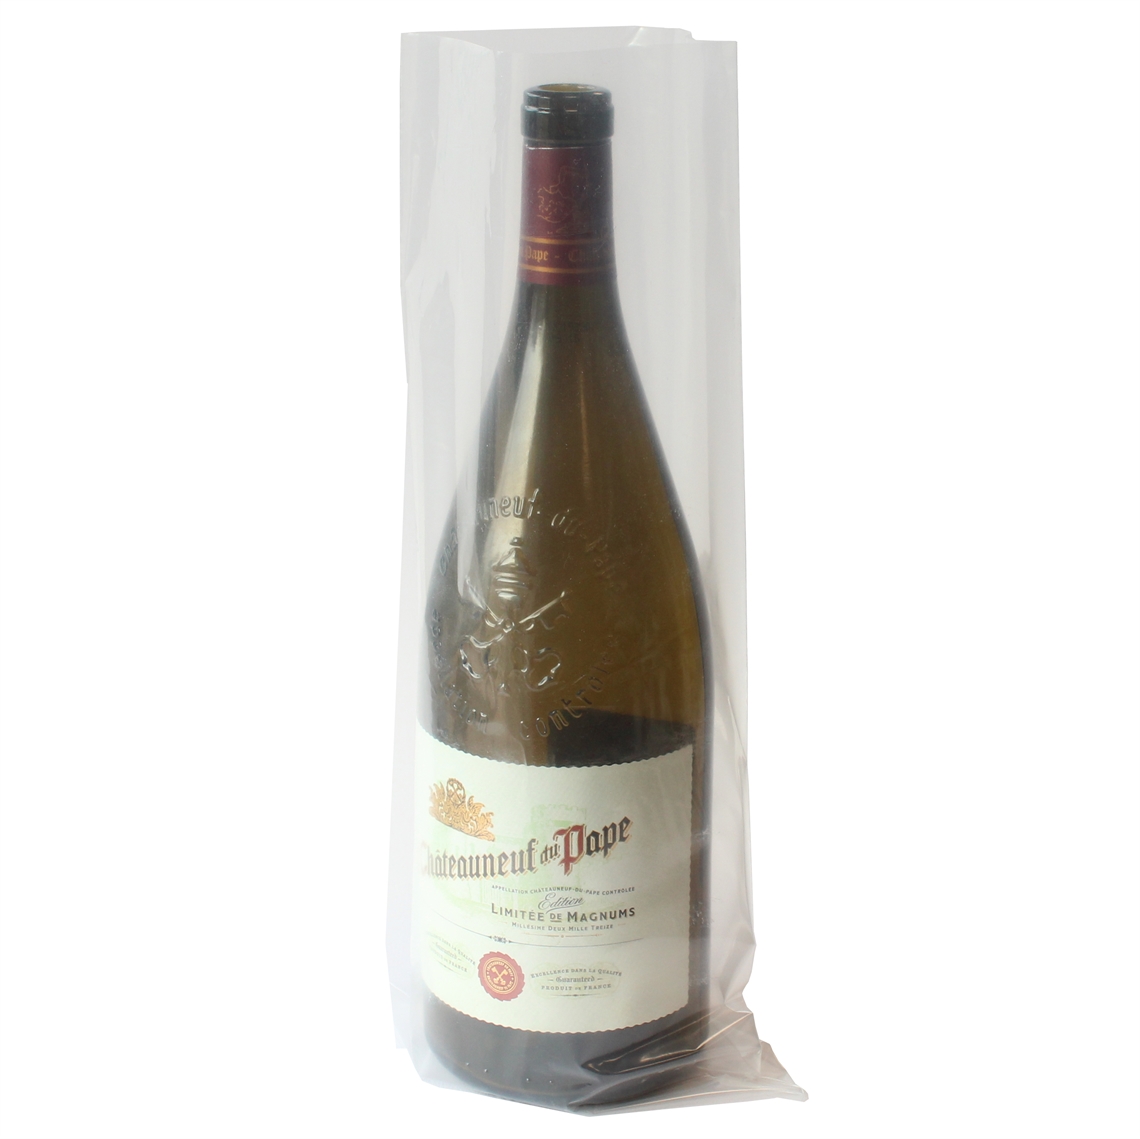 View more vacu vin from our Wine Bottle Cellar Sleeves range